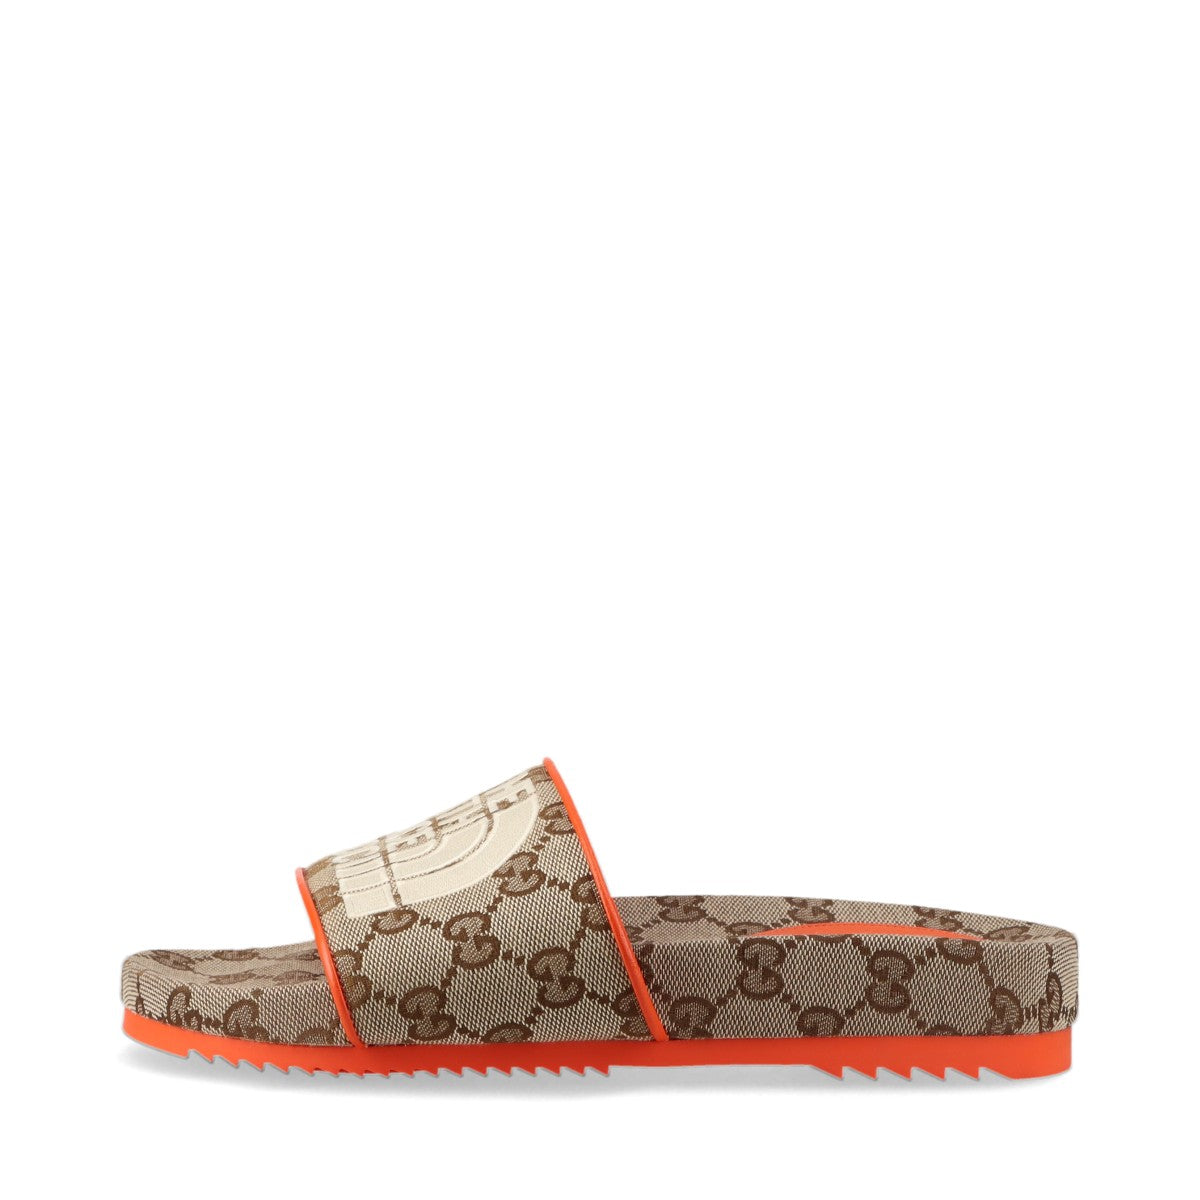 Gucci x North Face GG Canvas Canvas & leather Sandals EU36 Ladies' Beige x orange 679947 There is a bag